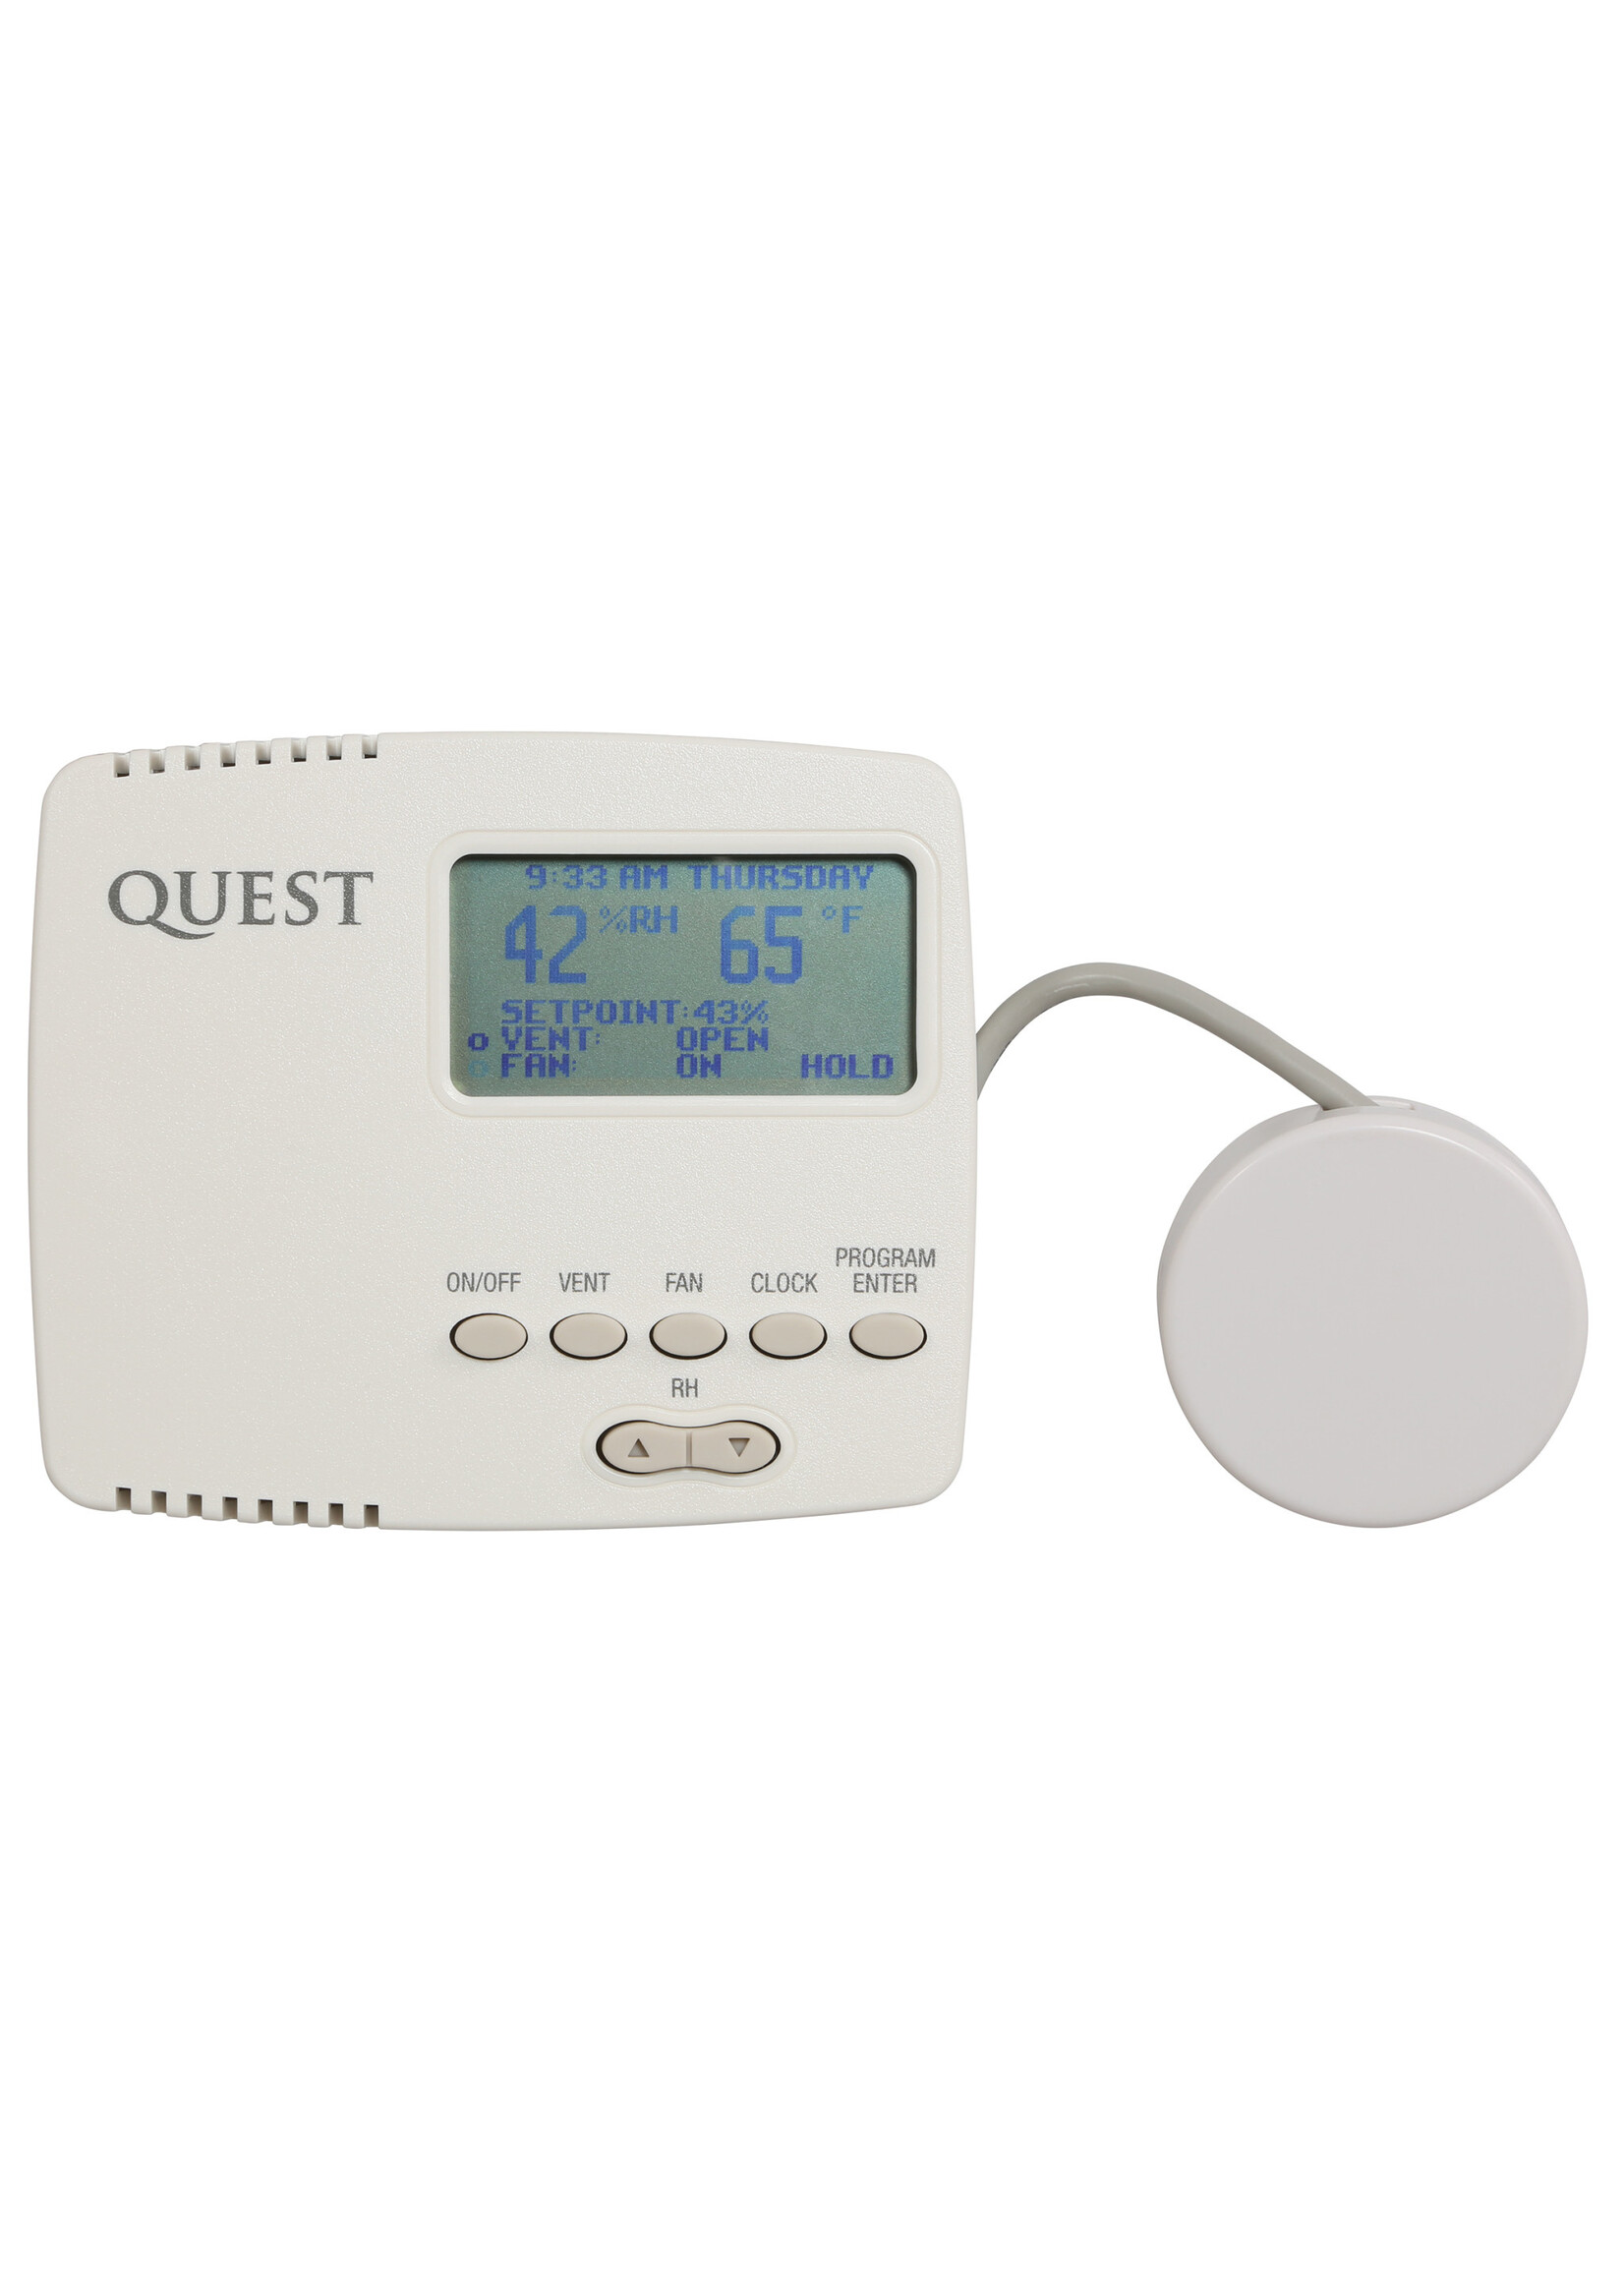 Quest Quest DEH 3000R Wall Mounted Humidistat